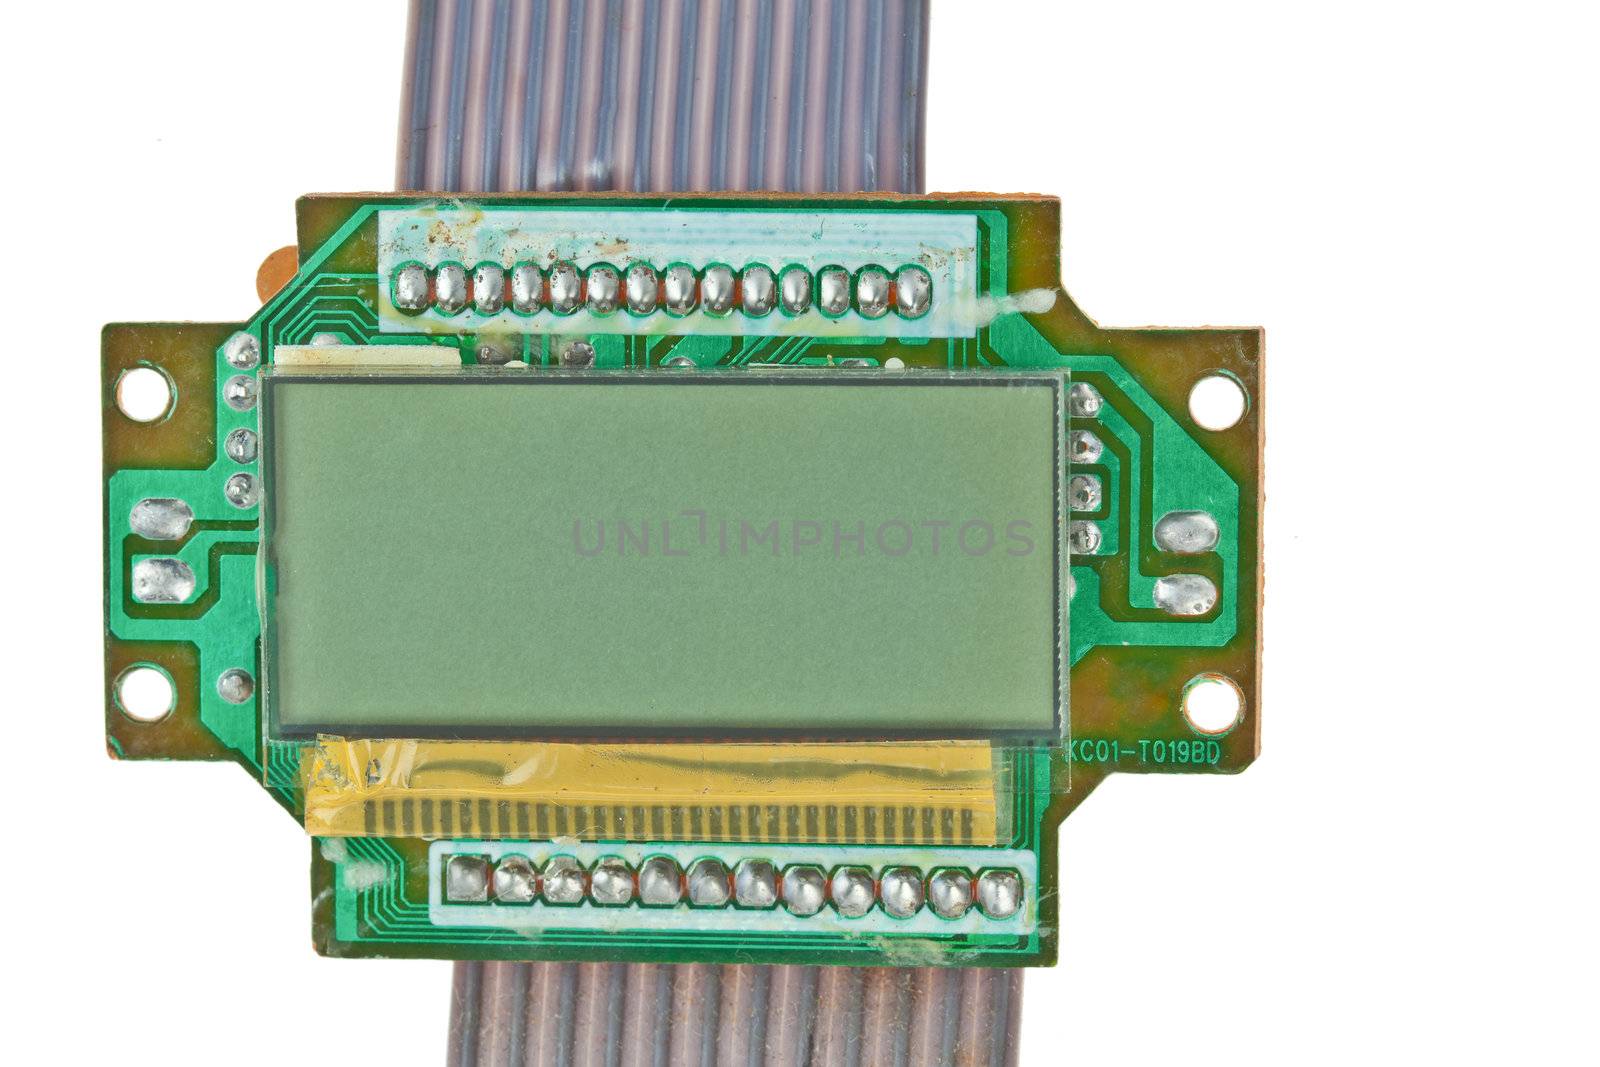 The printed-circuit board with electronic components macro backg by FrameAngel